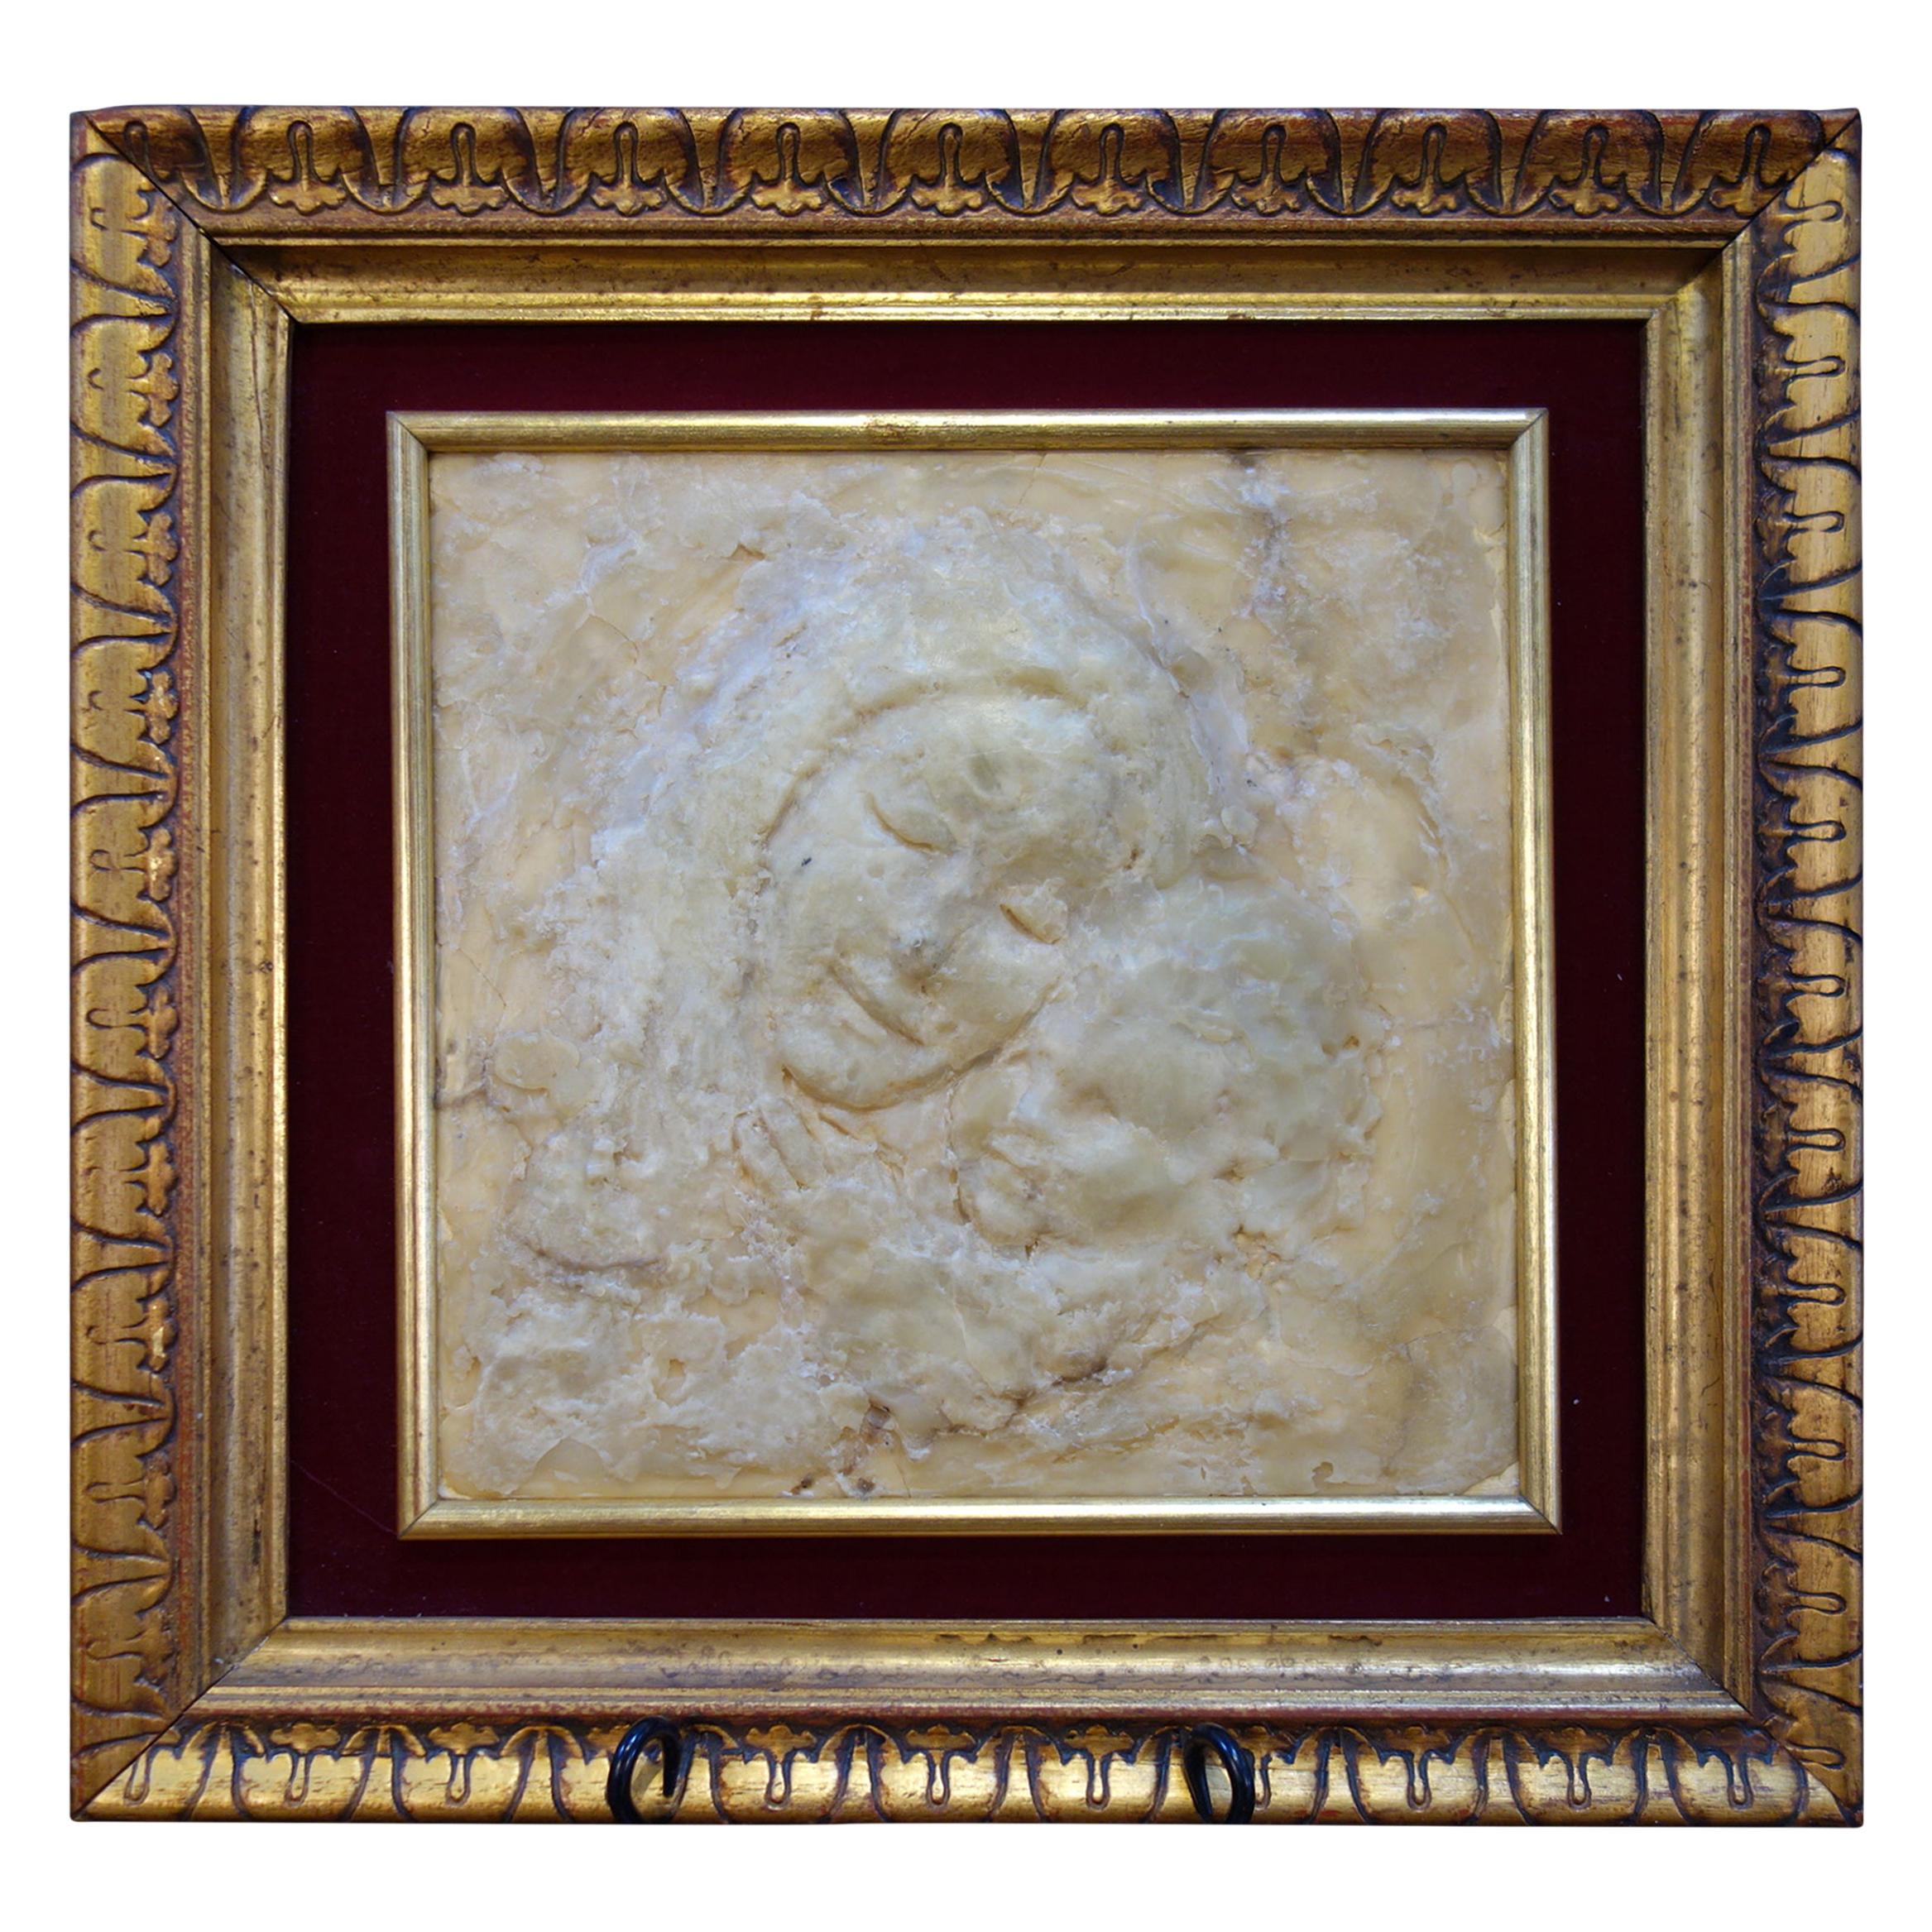 Vintage Italian Framed High Relief Wax Art Form of Madonna and Child, circa 1900